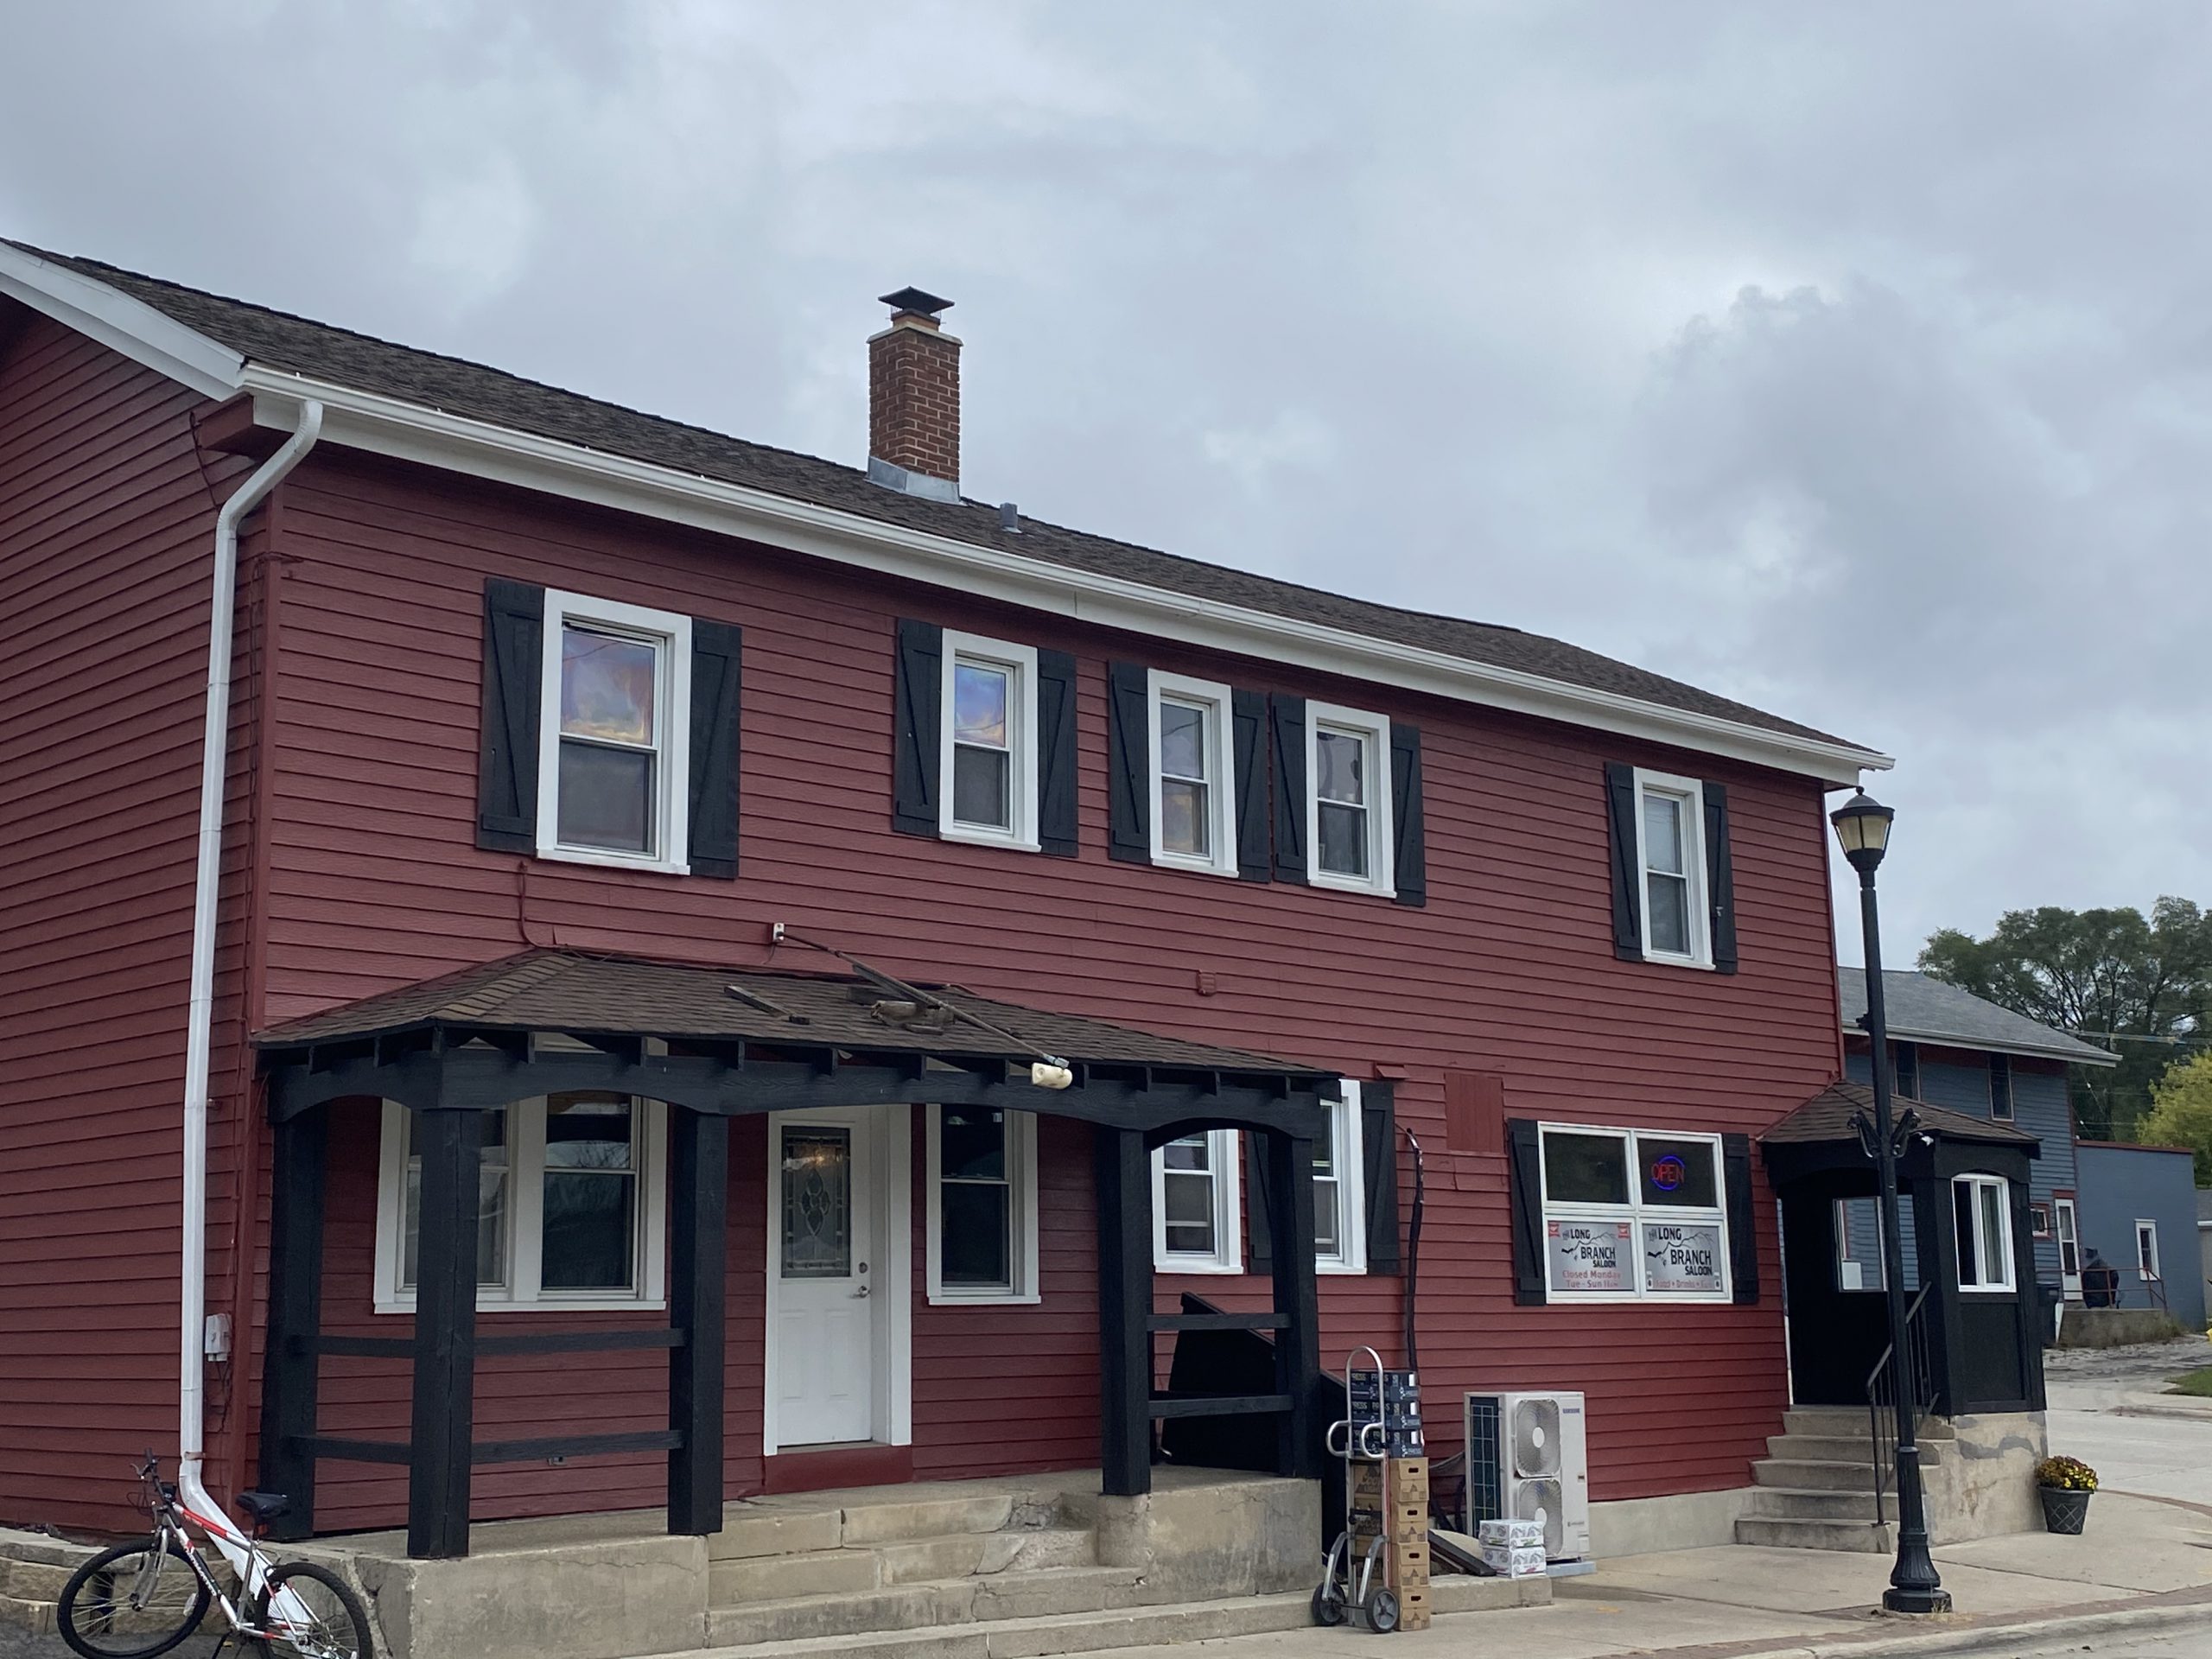 The property home to Long Branch Saloon is for sale - Washington County  Insider